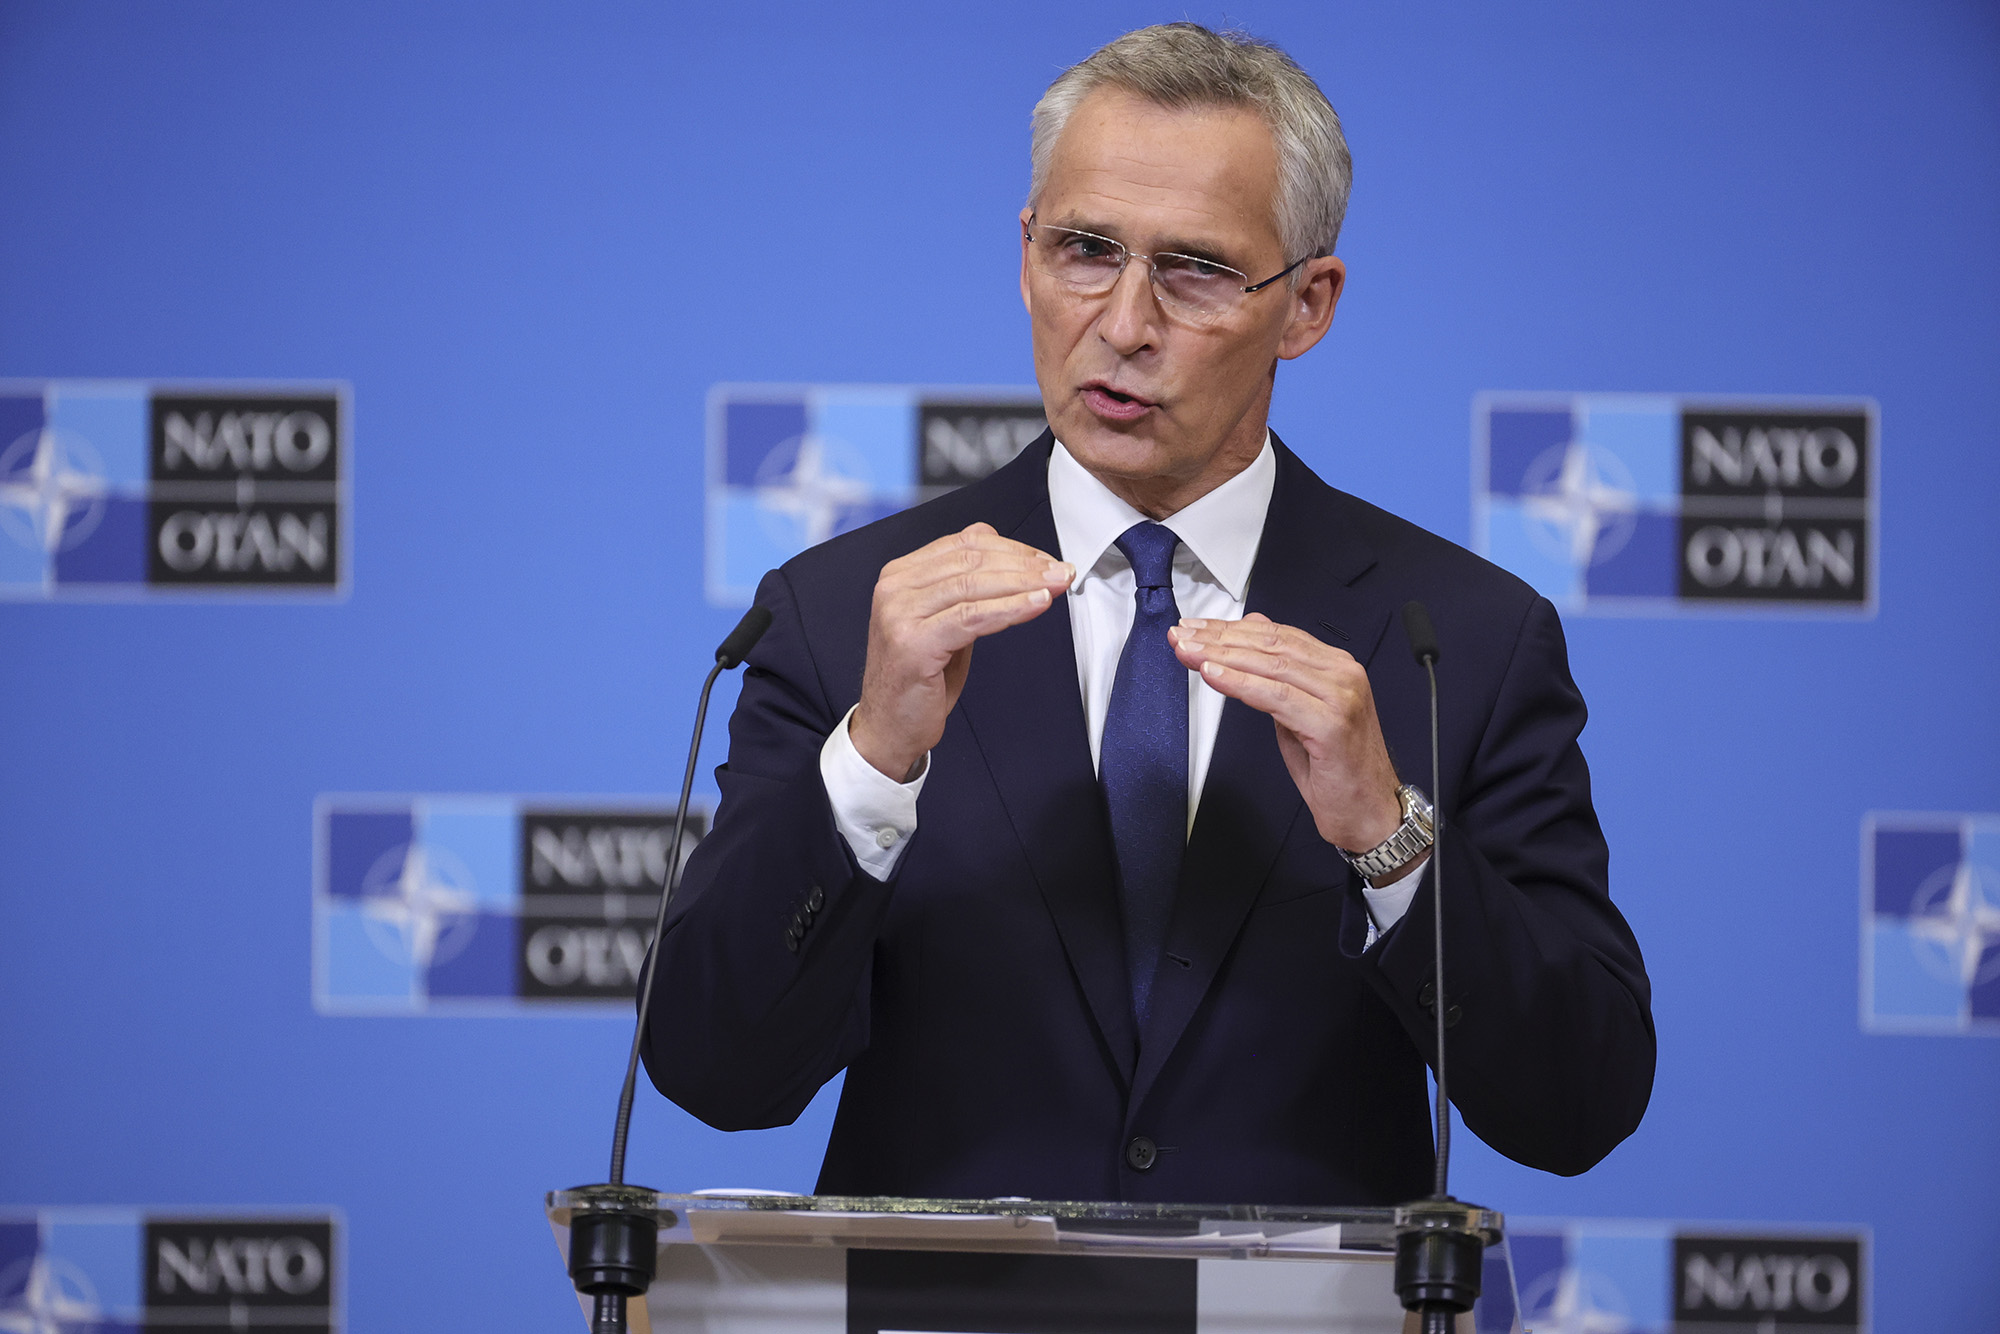 NATO plays key support role for Ukraine, secretary general says